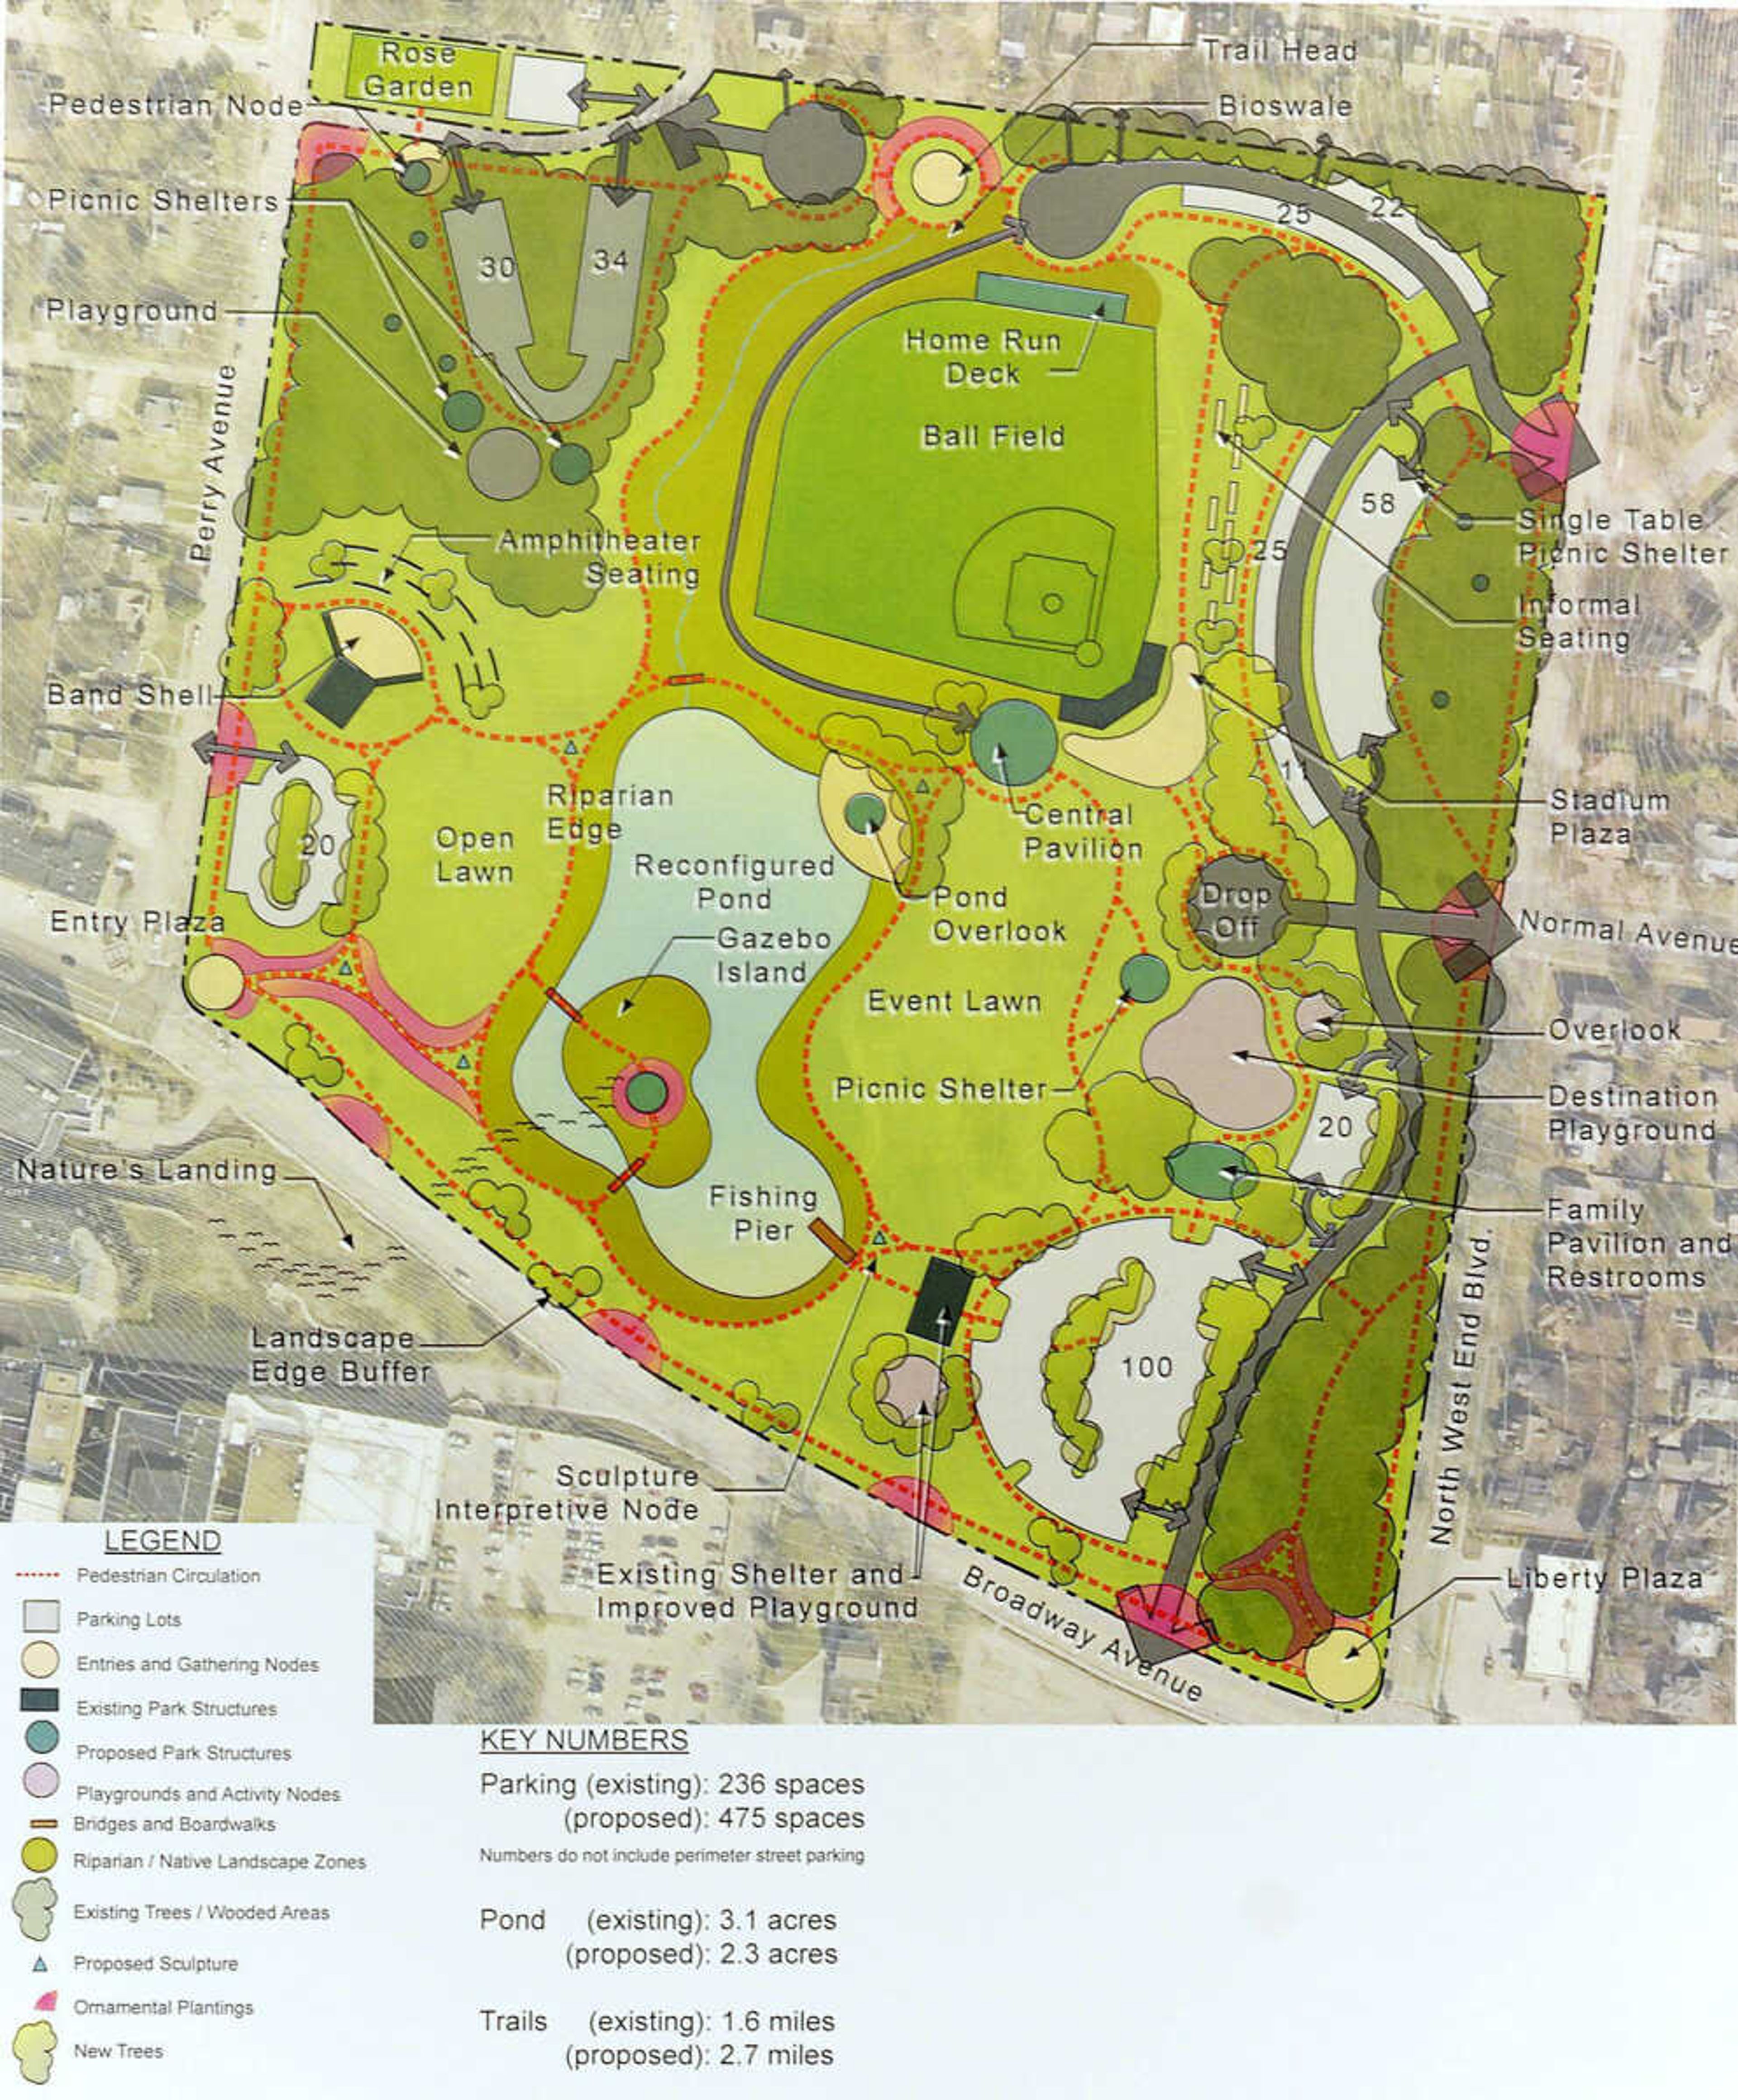 Proposal Plan B for changes to Capaha Park.